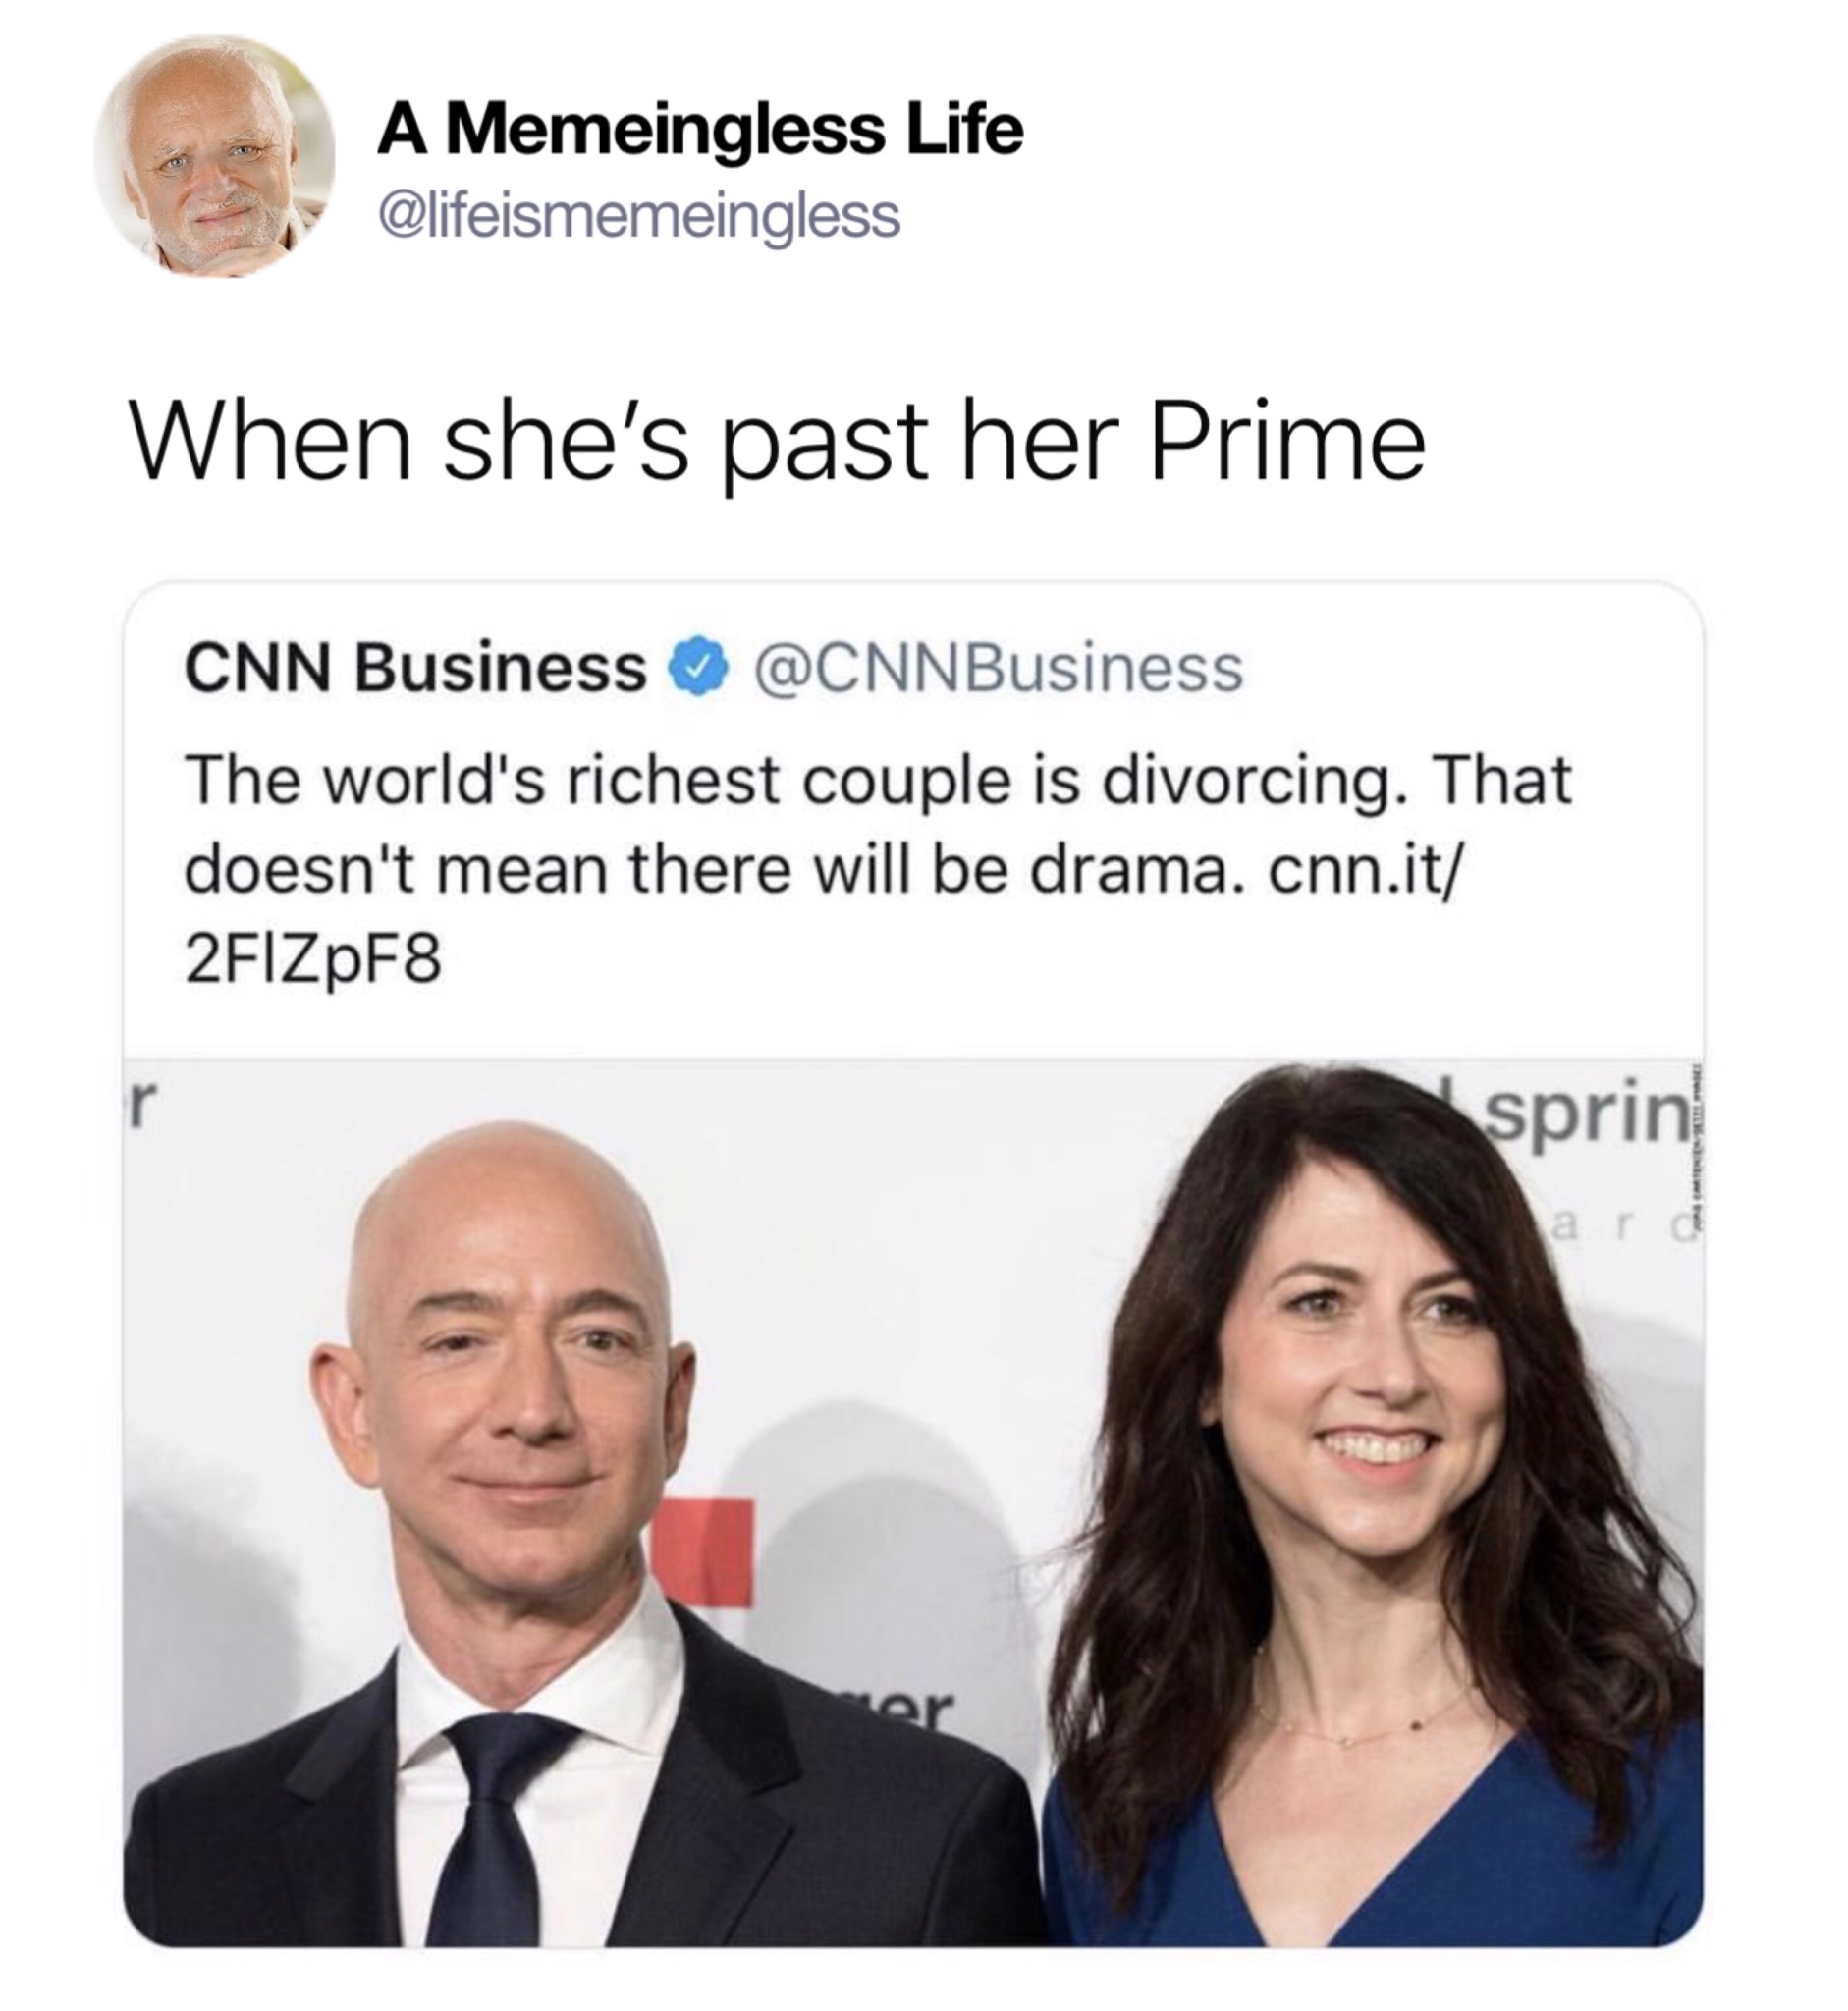 jeff bezos - A Memeingless Life When she's past her Prime Cnn Business The world's richest couple is divorcing. That doesn't mean there will be drama. cnn.it 2FIZpF8 sprin ad